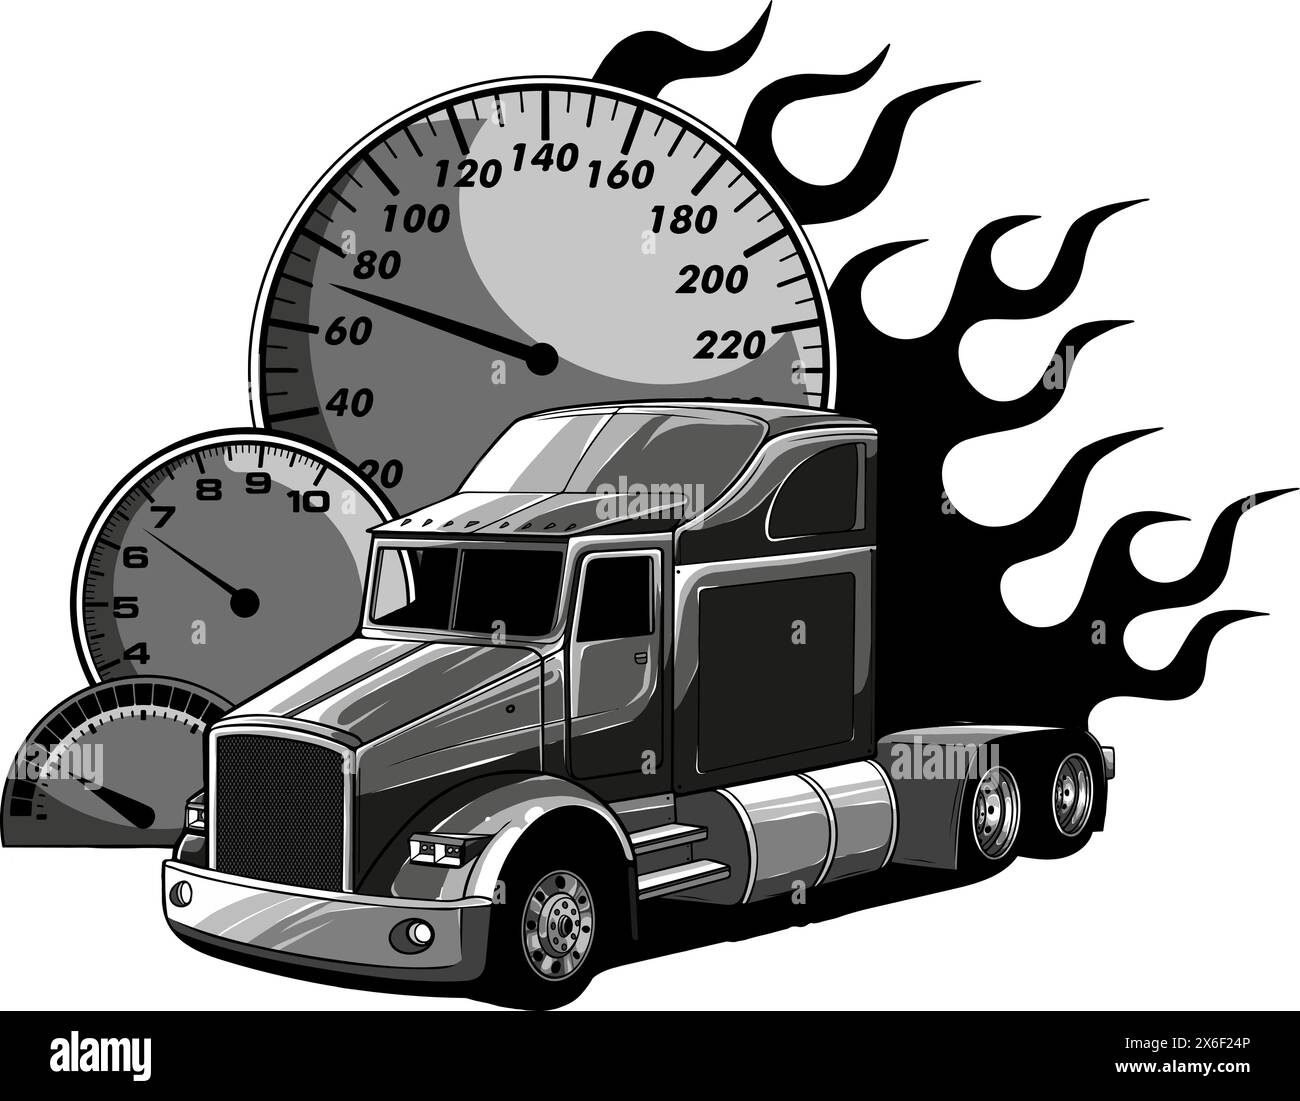 Monochrome semi truck with dashboard vector illustration on white background Stock Vector